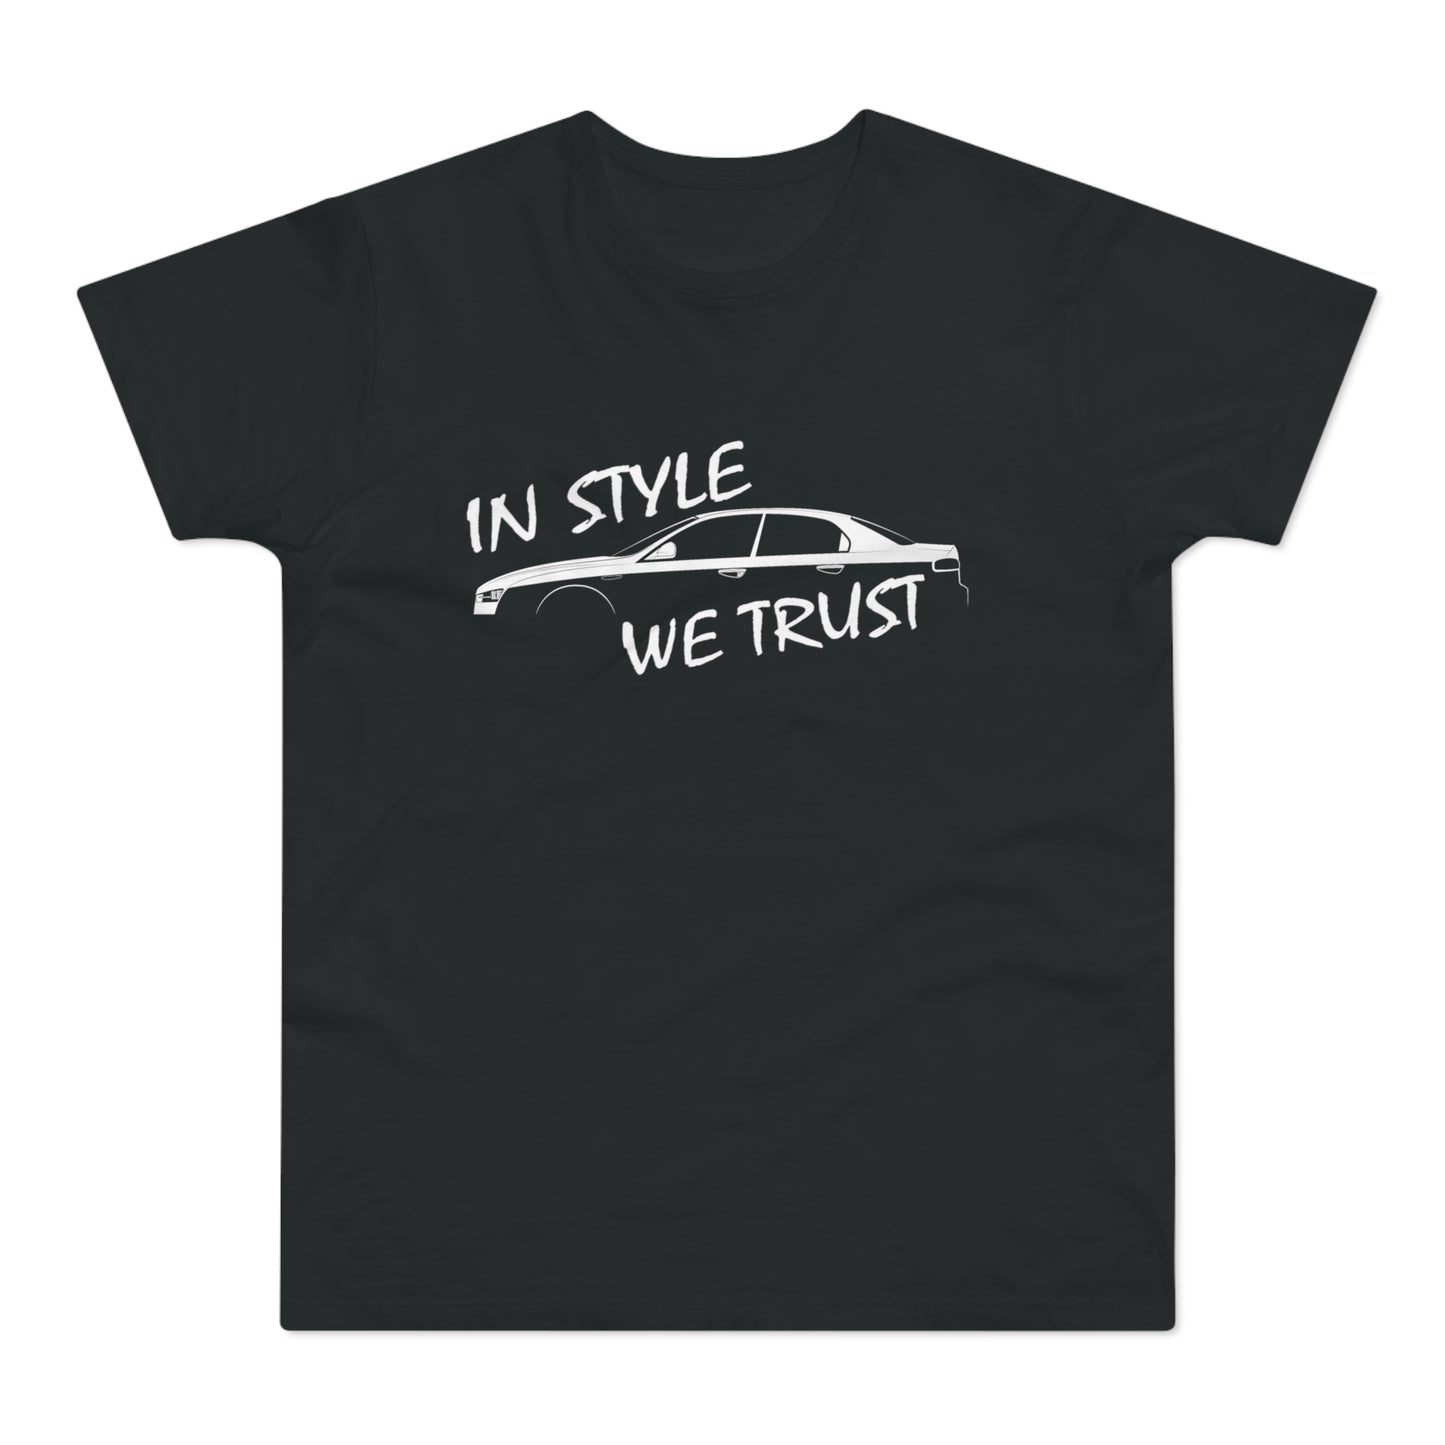 159 "In Style We Trust" Shirt